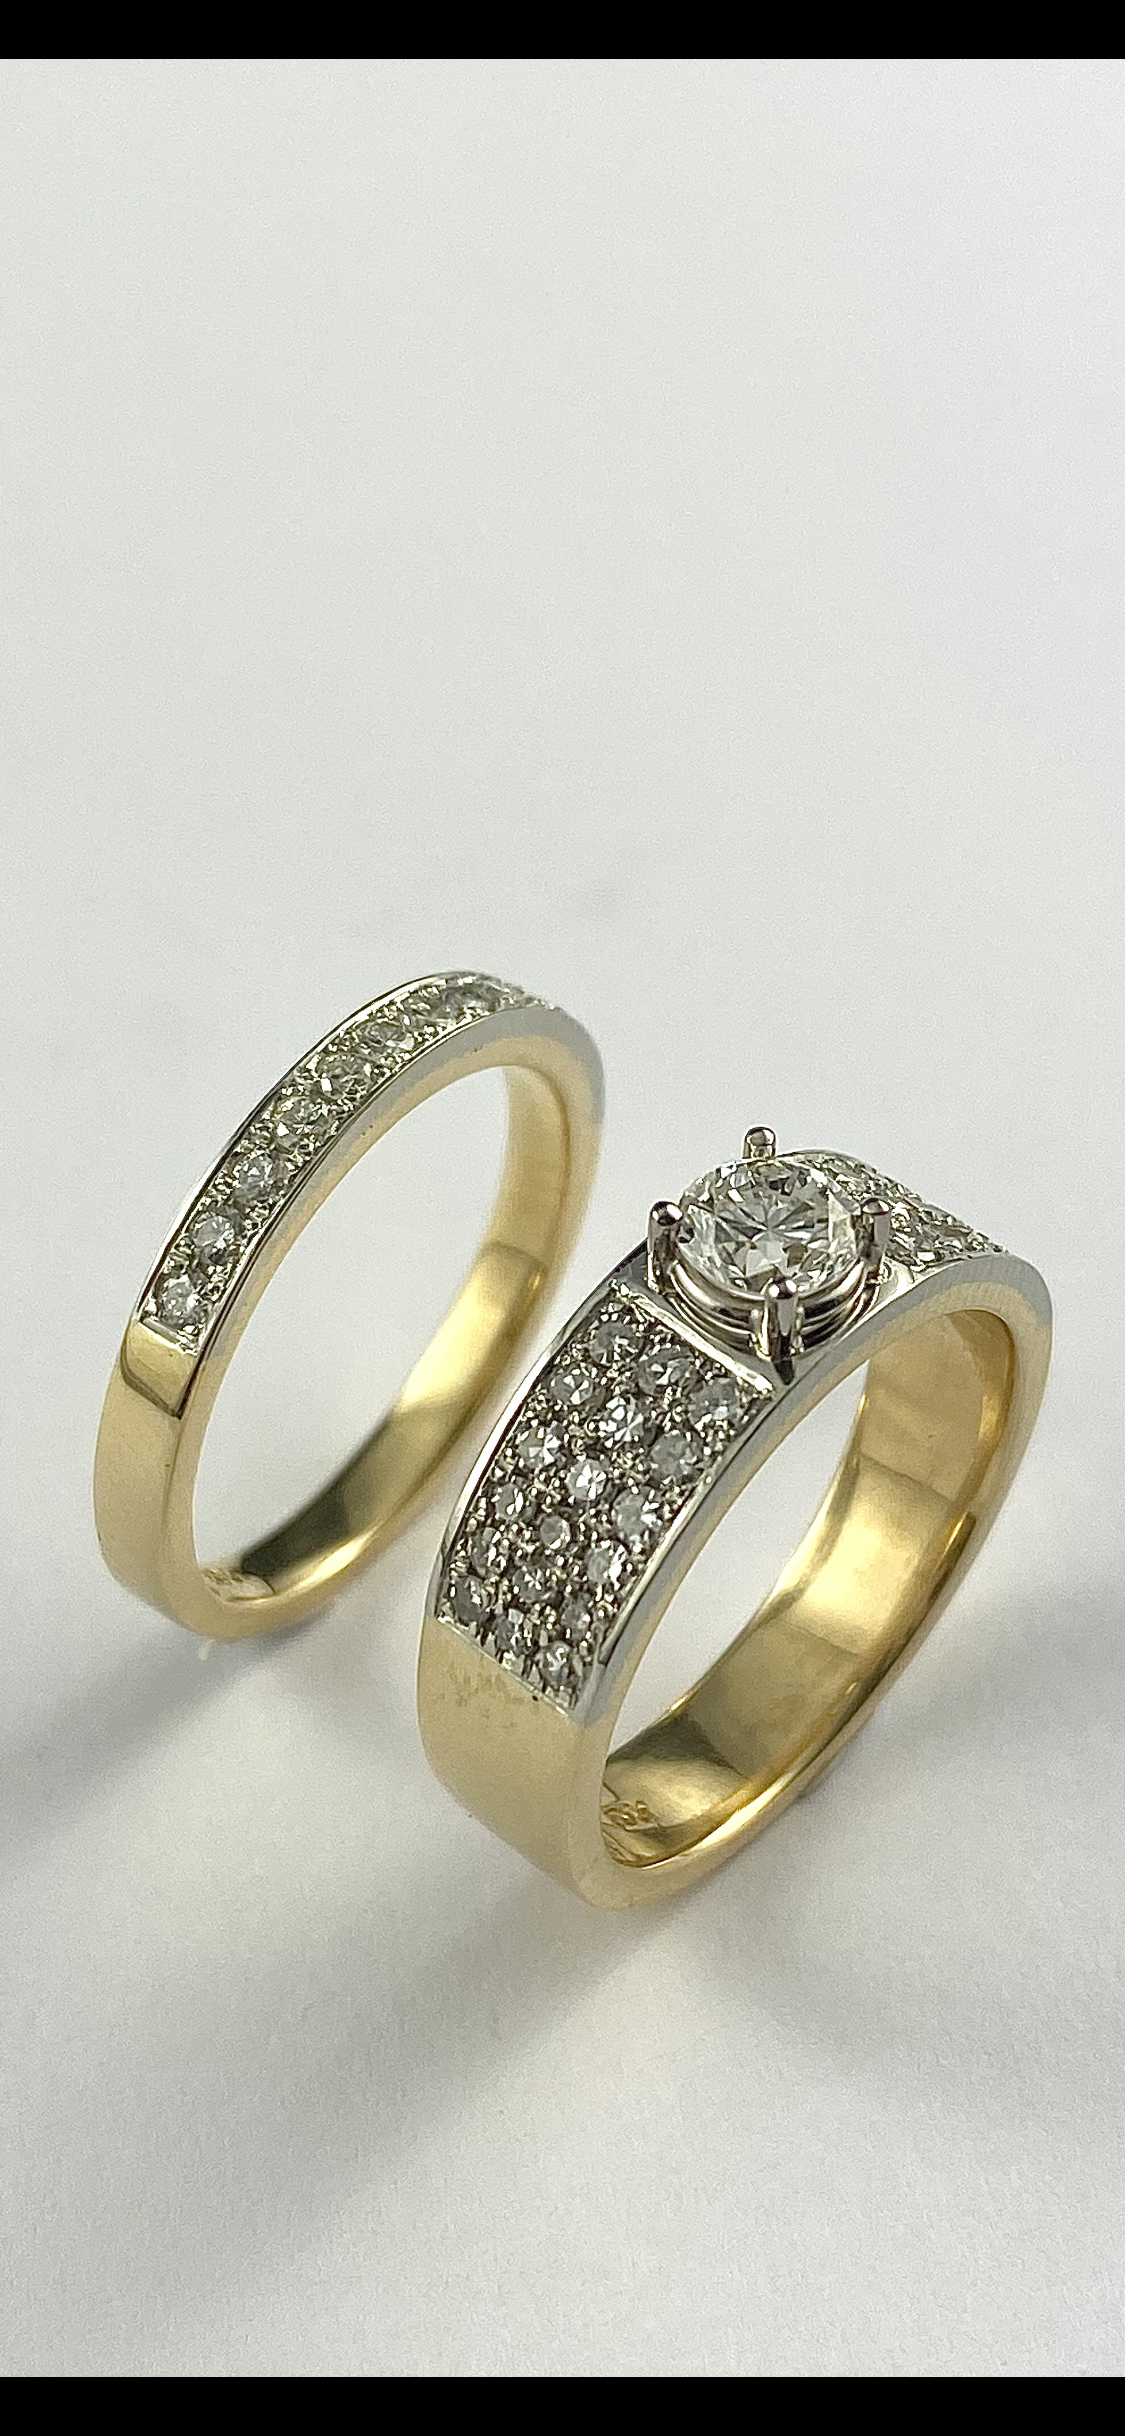 19K White and 18K Yellow Gold Diamond Ring and Matching Pave Band